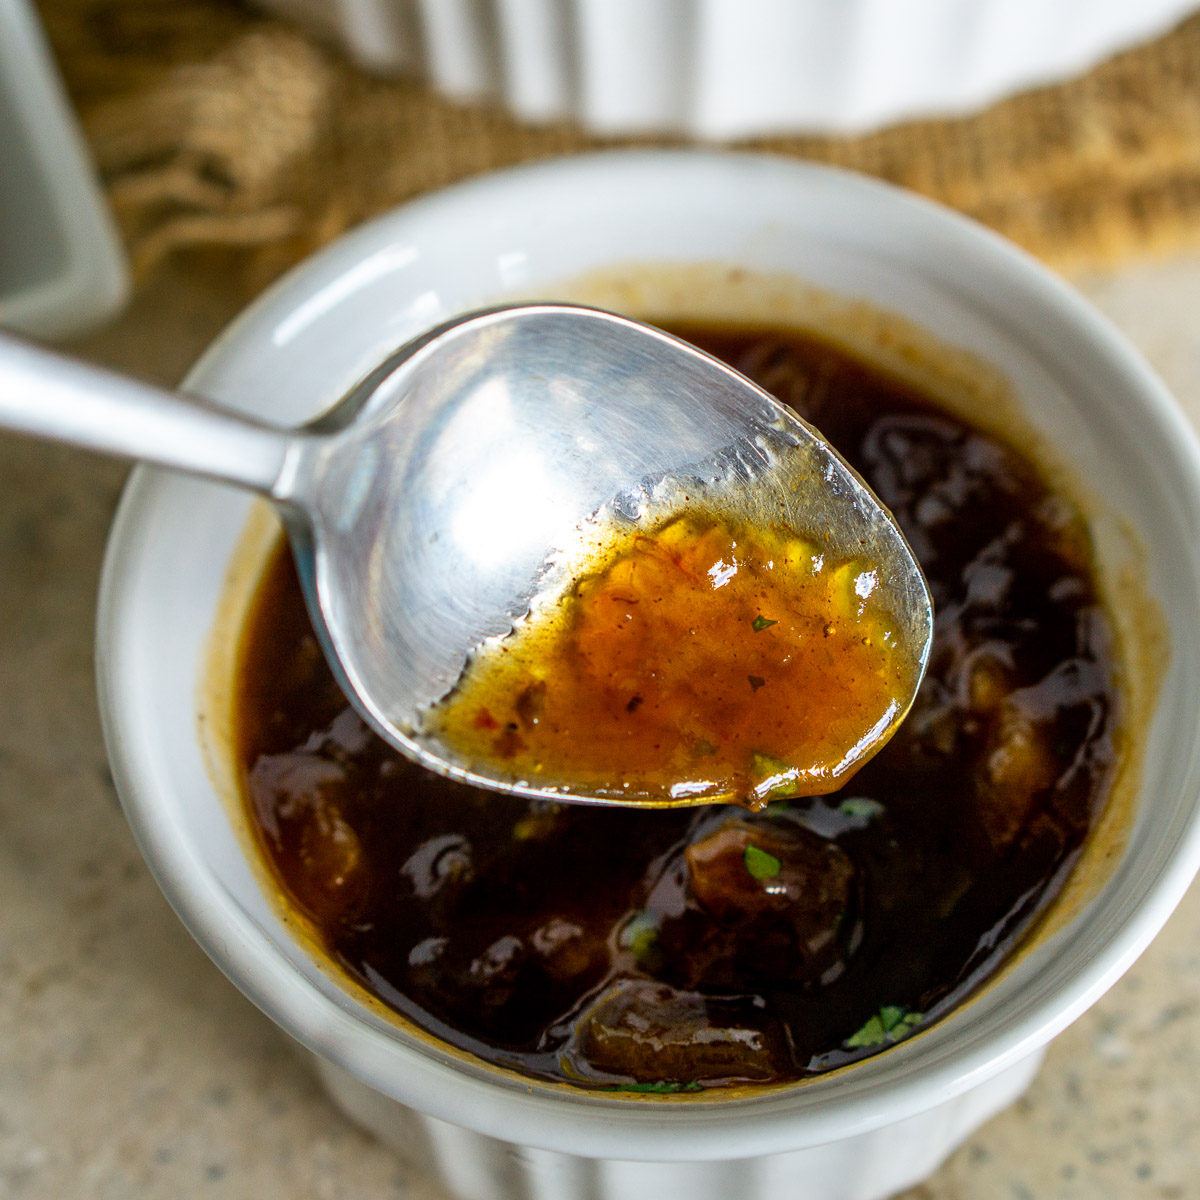 Spoon showing texture of peach preserves glaze with BBQ sauce